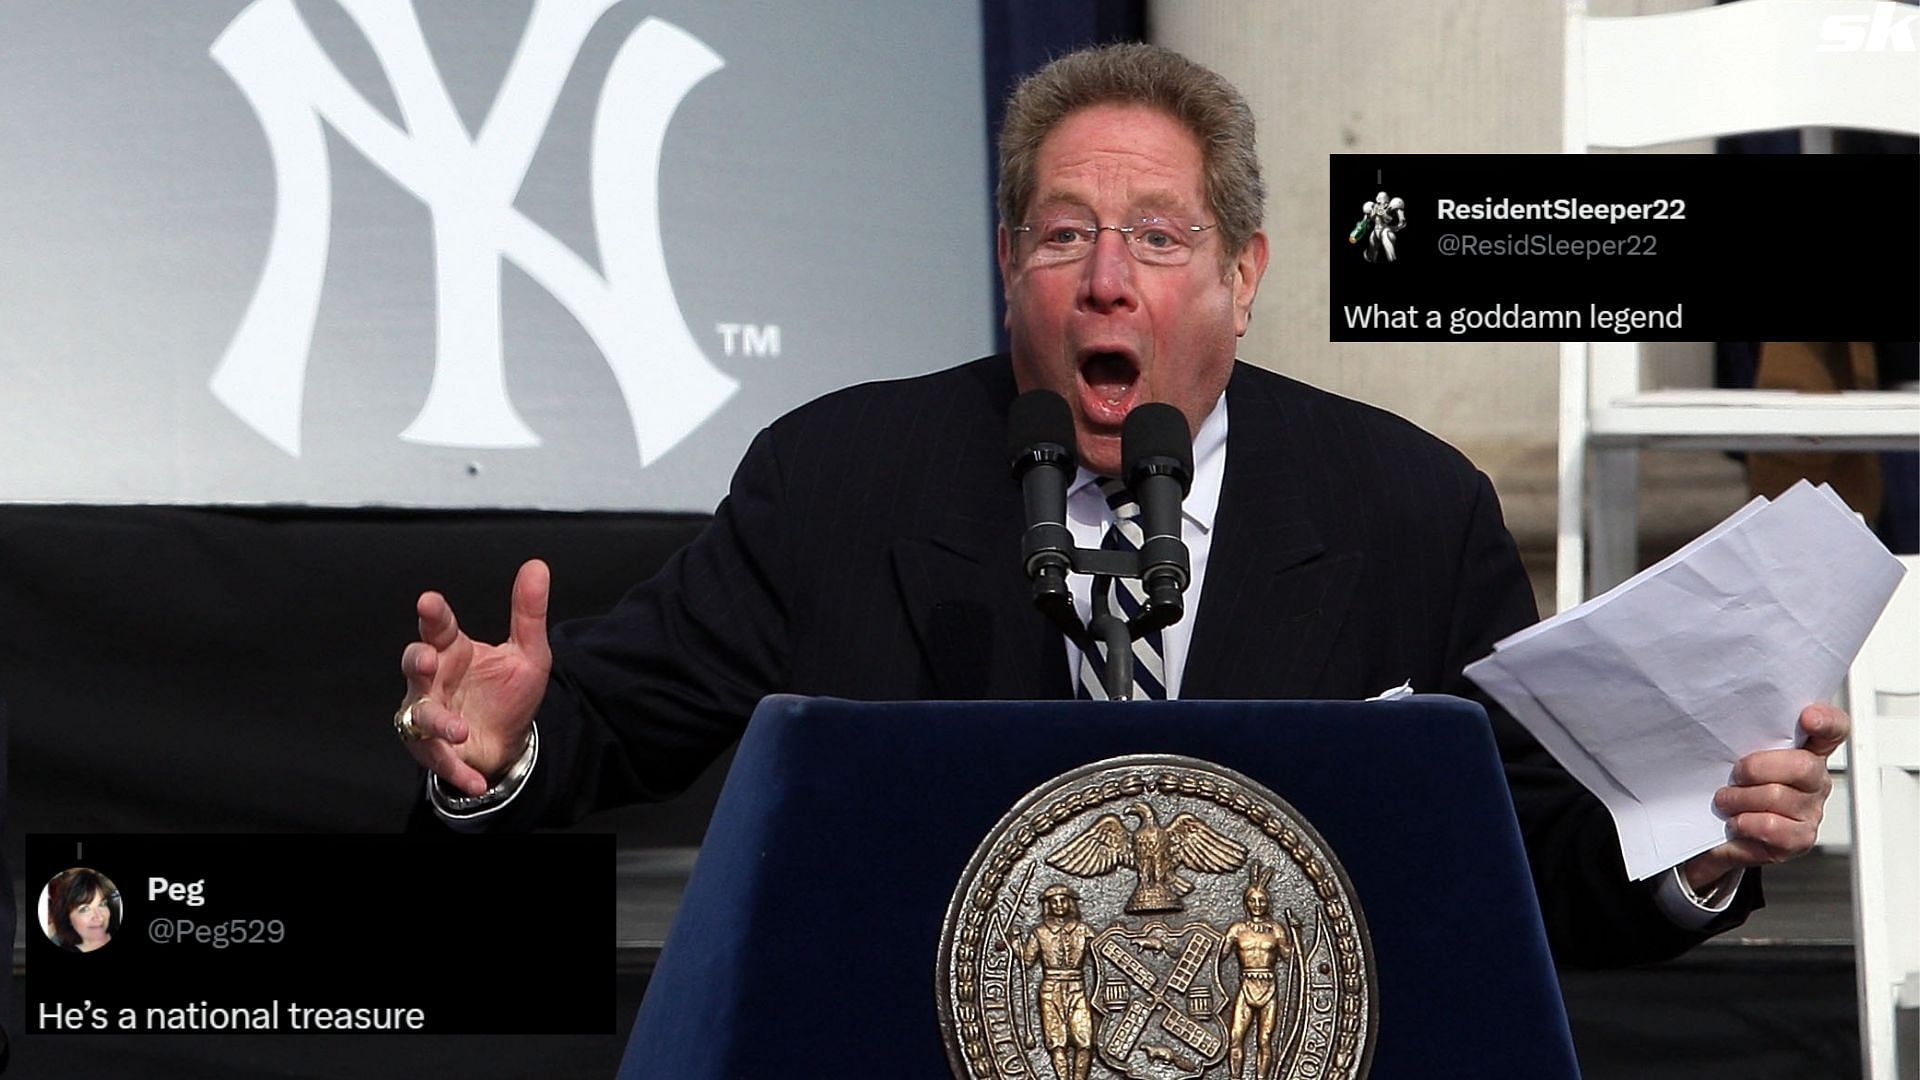  New York Yankees broadcasters Michael Kay (L) and John Sterling speak during the New York Yankees World Series Victory Celebration at City Hall on November 6, 2009 in New York, New York.